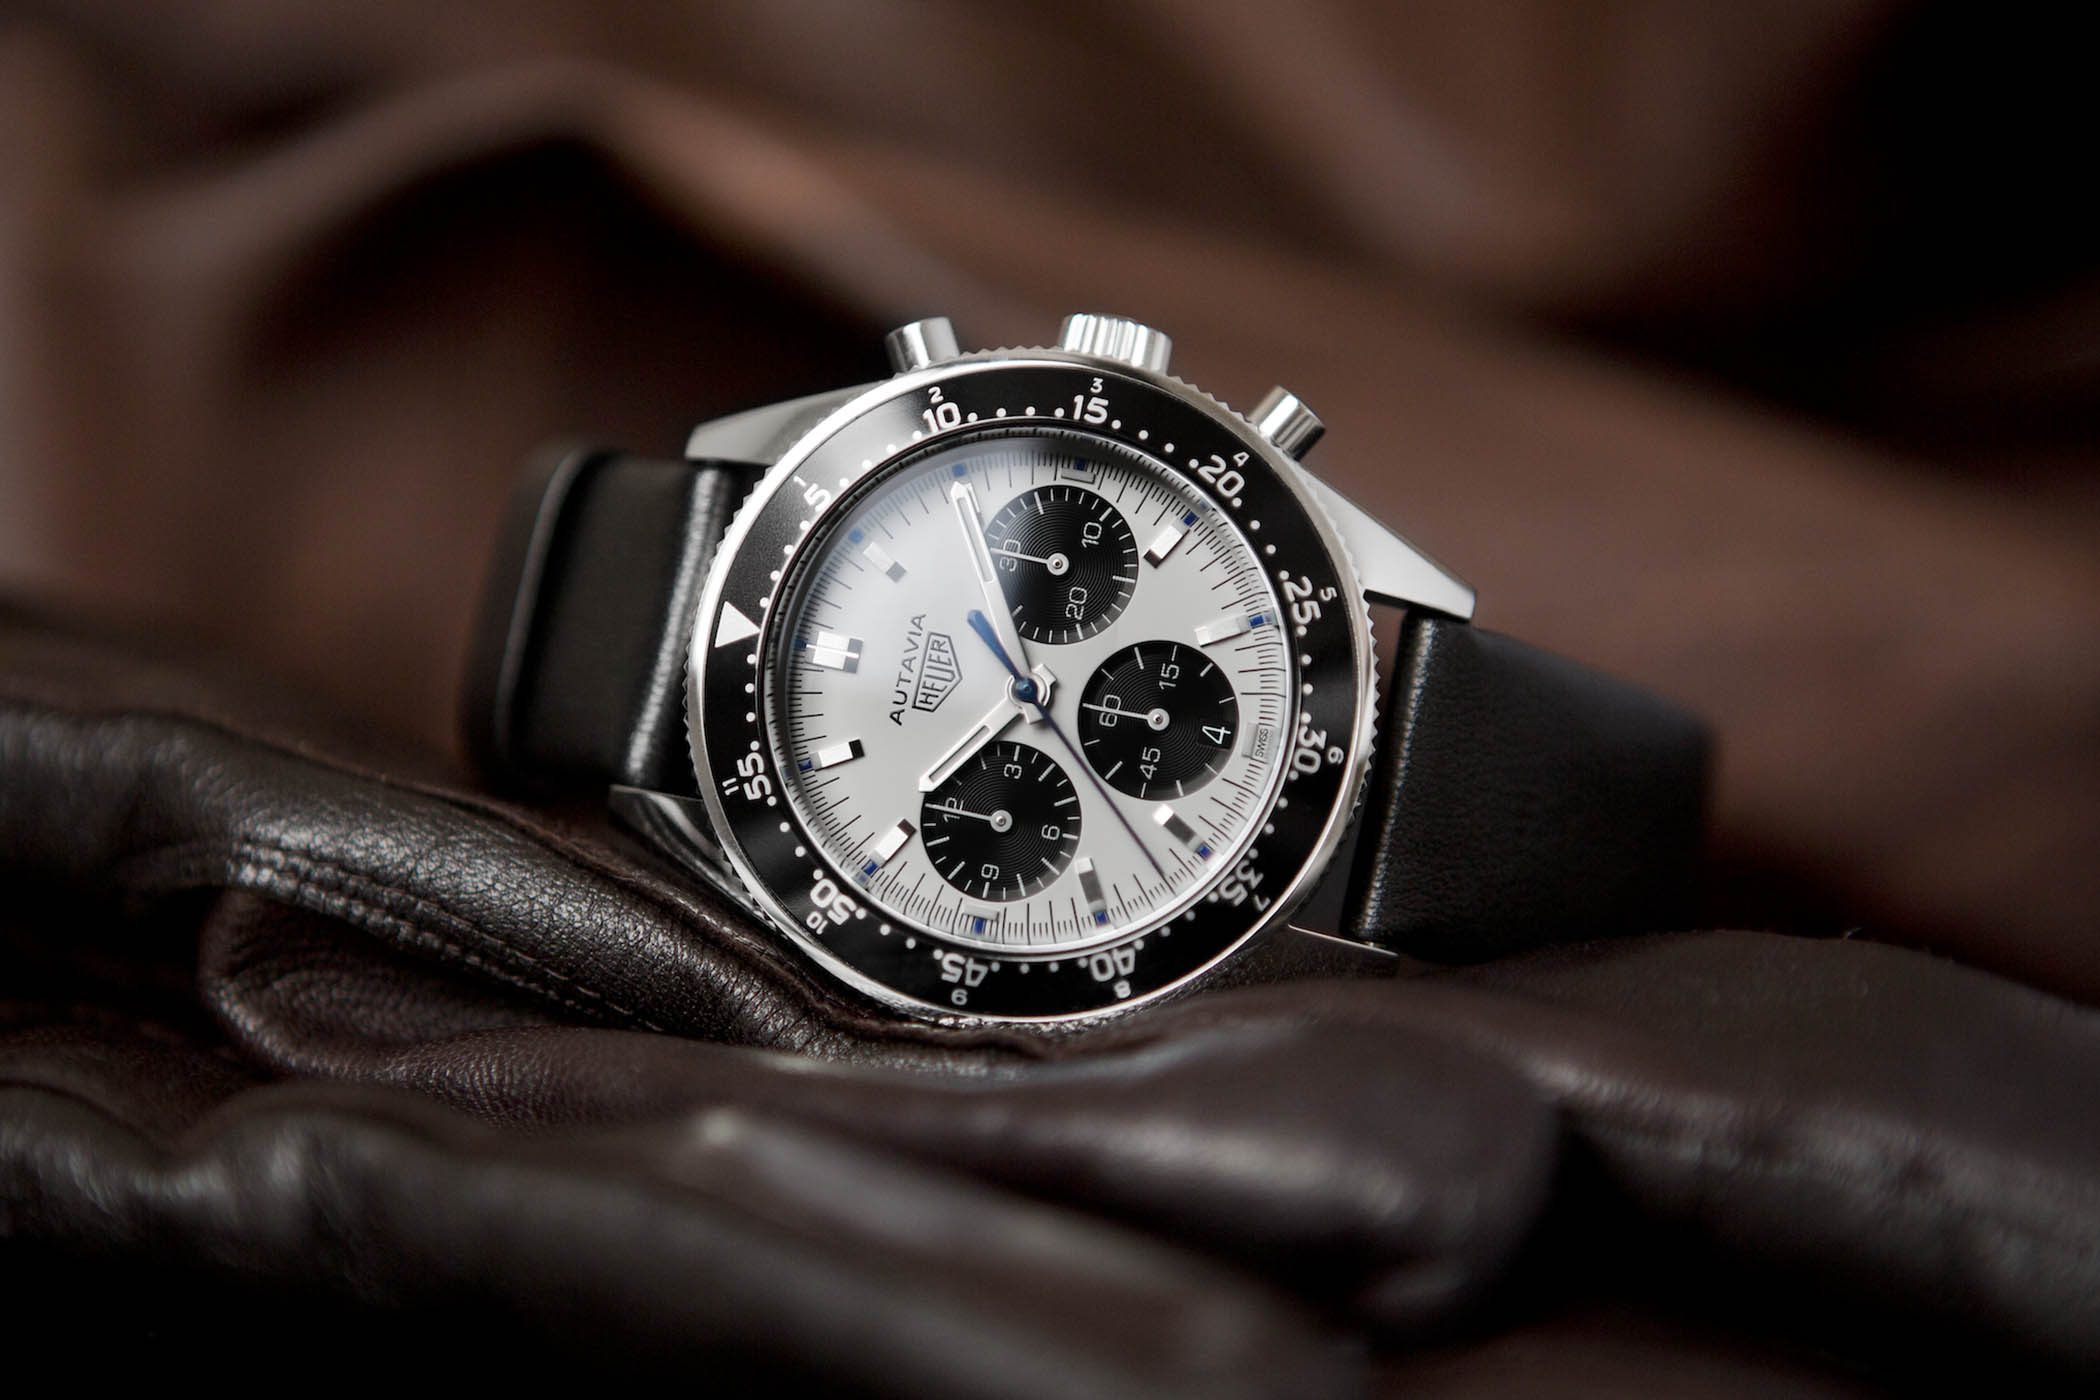 Heuer Autavia Jo Siffert Collector’s Edition by Calibre 11